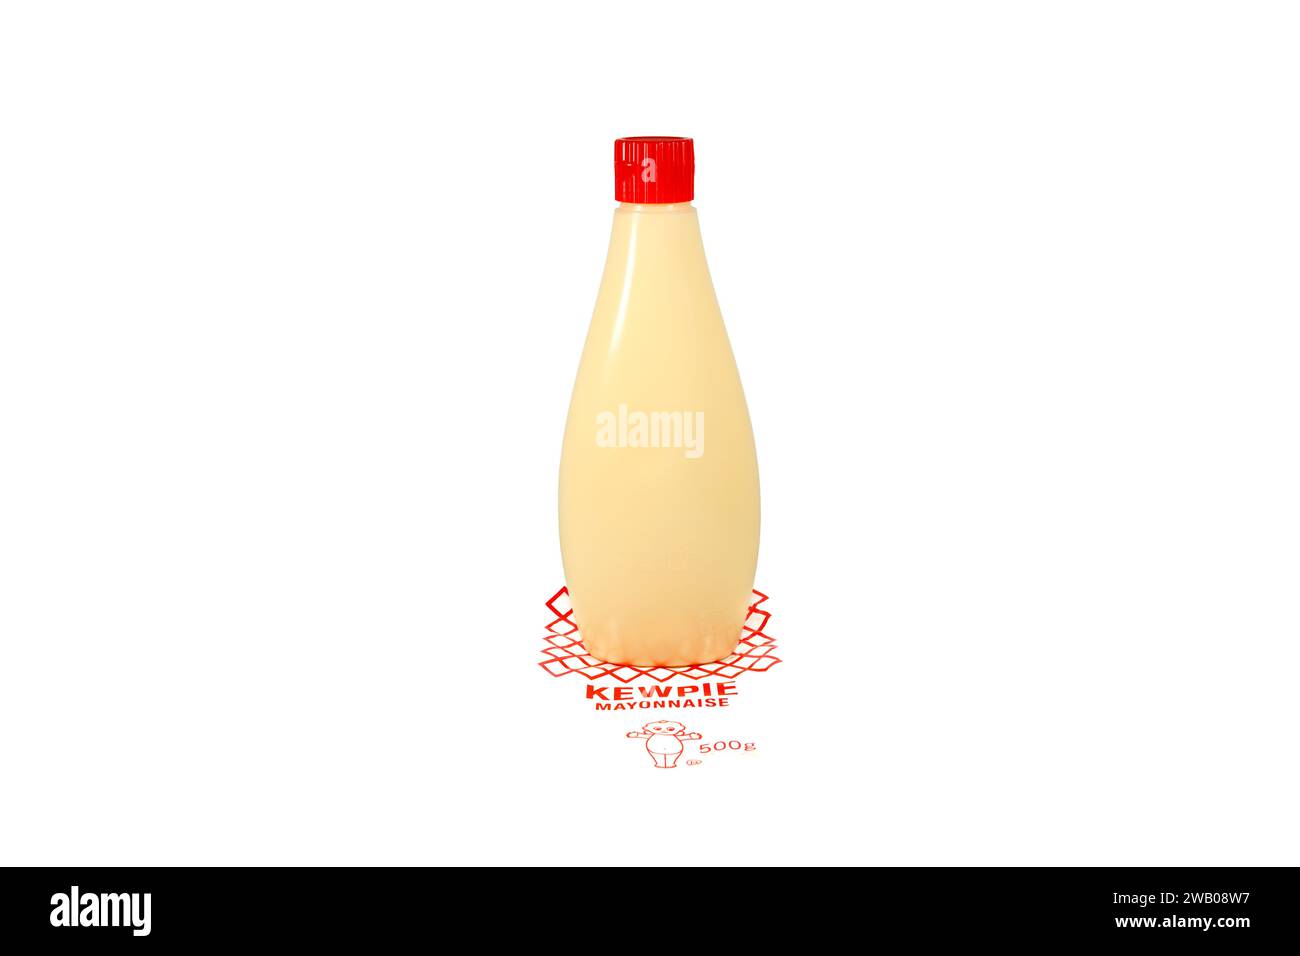 A bottle of Kewpie Mayonnaise isolated on a white background. cutout image for illustration and editorial use. Stock Photo